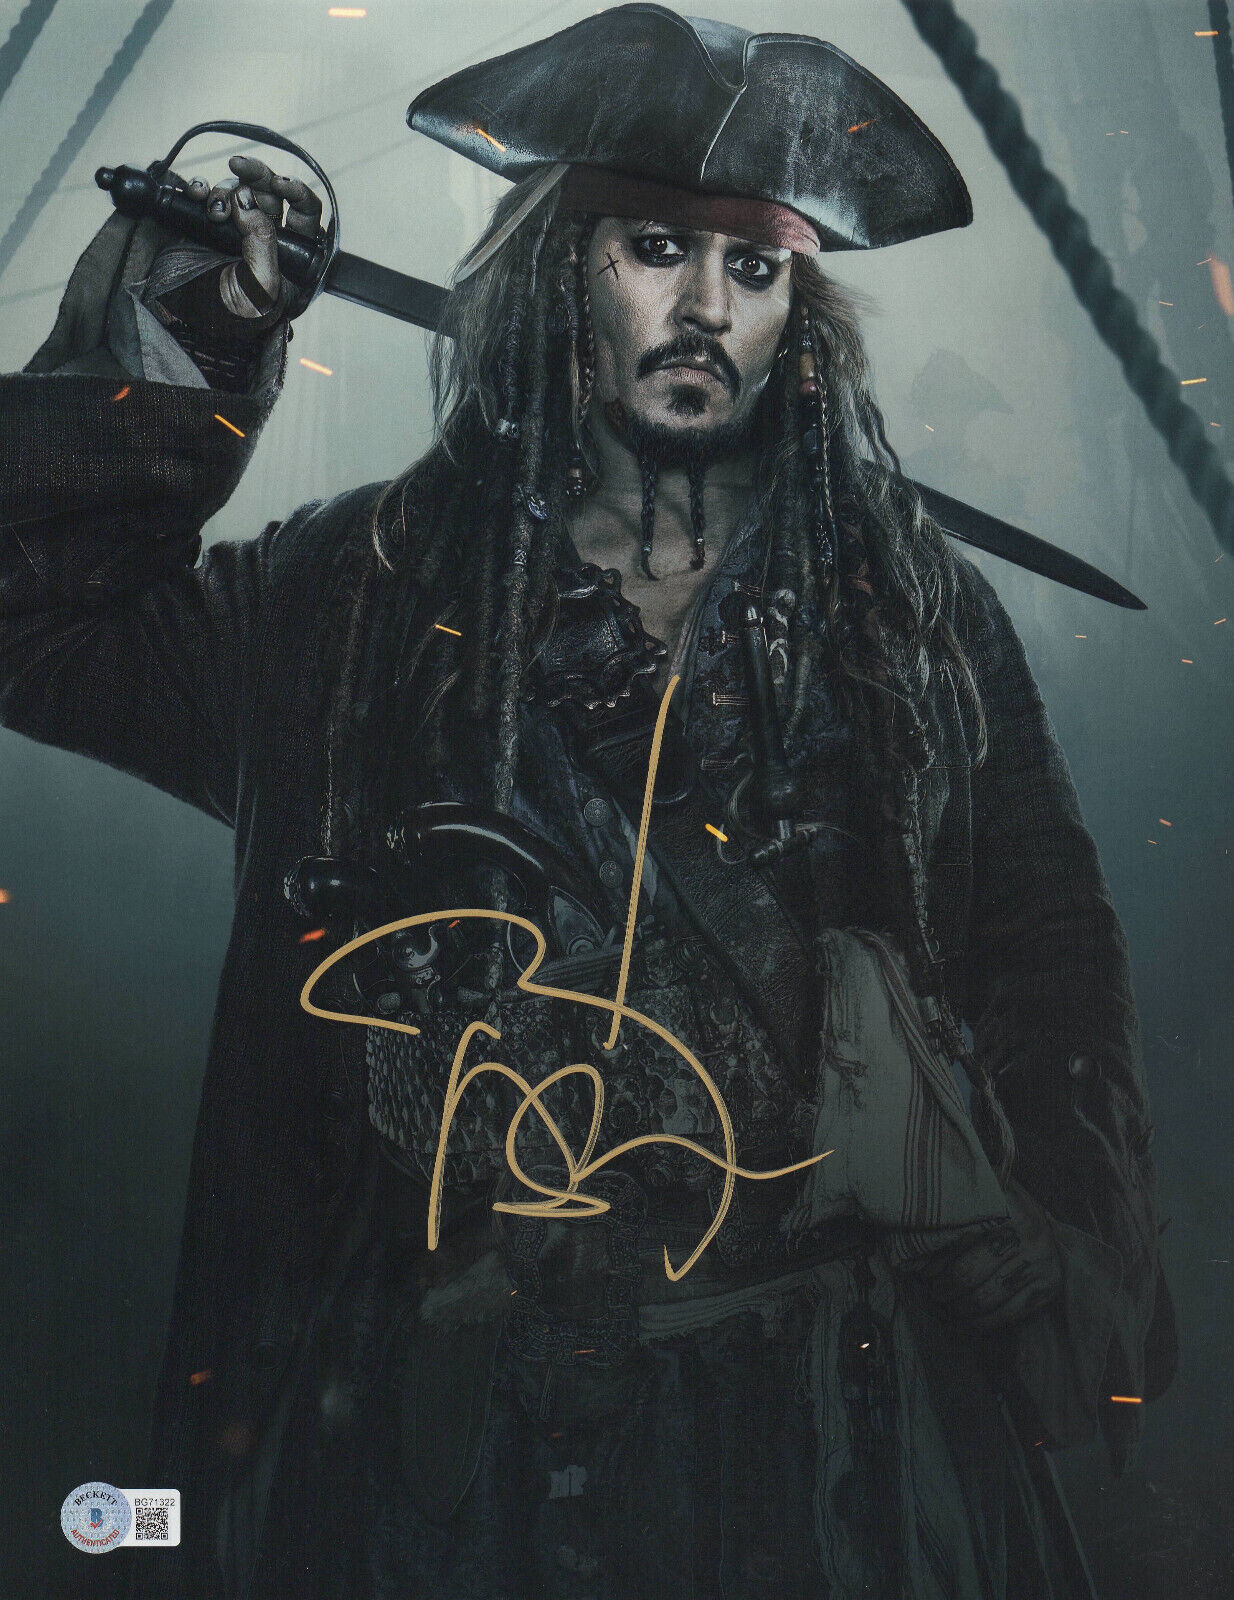 JOHNNY DEPP SIGNED \'PIRATES OF THE CARIBBEAN\' 11X14 PHOTO AUTOGRAPH BECKETT BAS